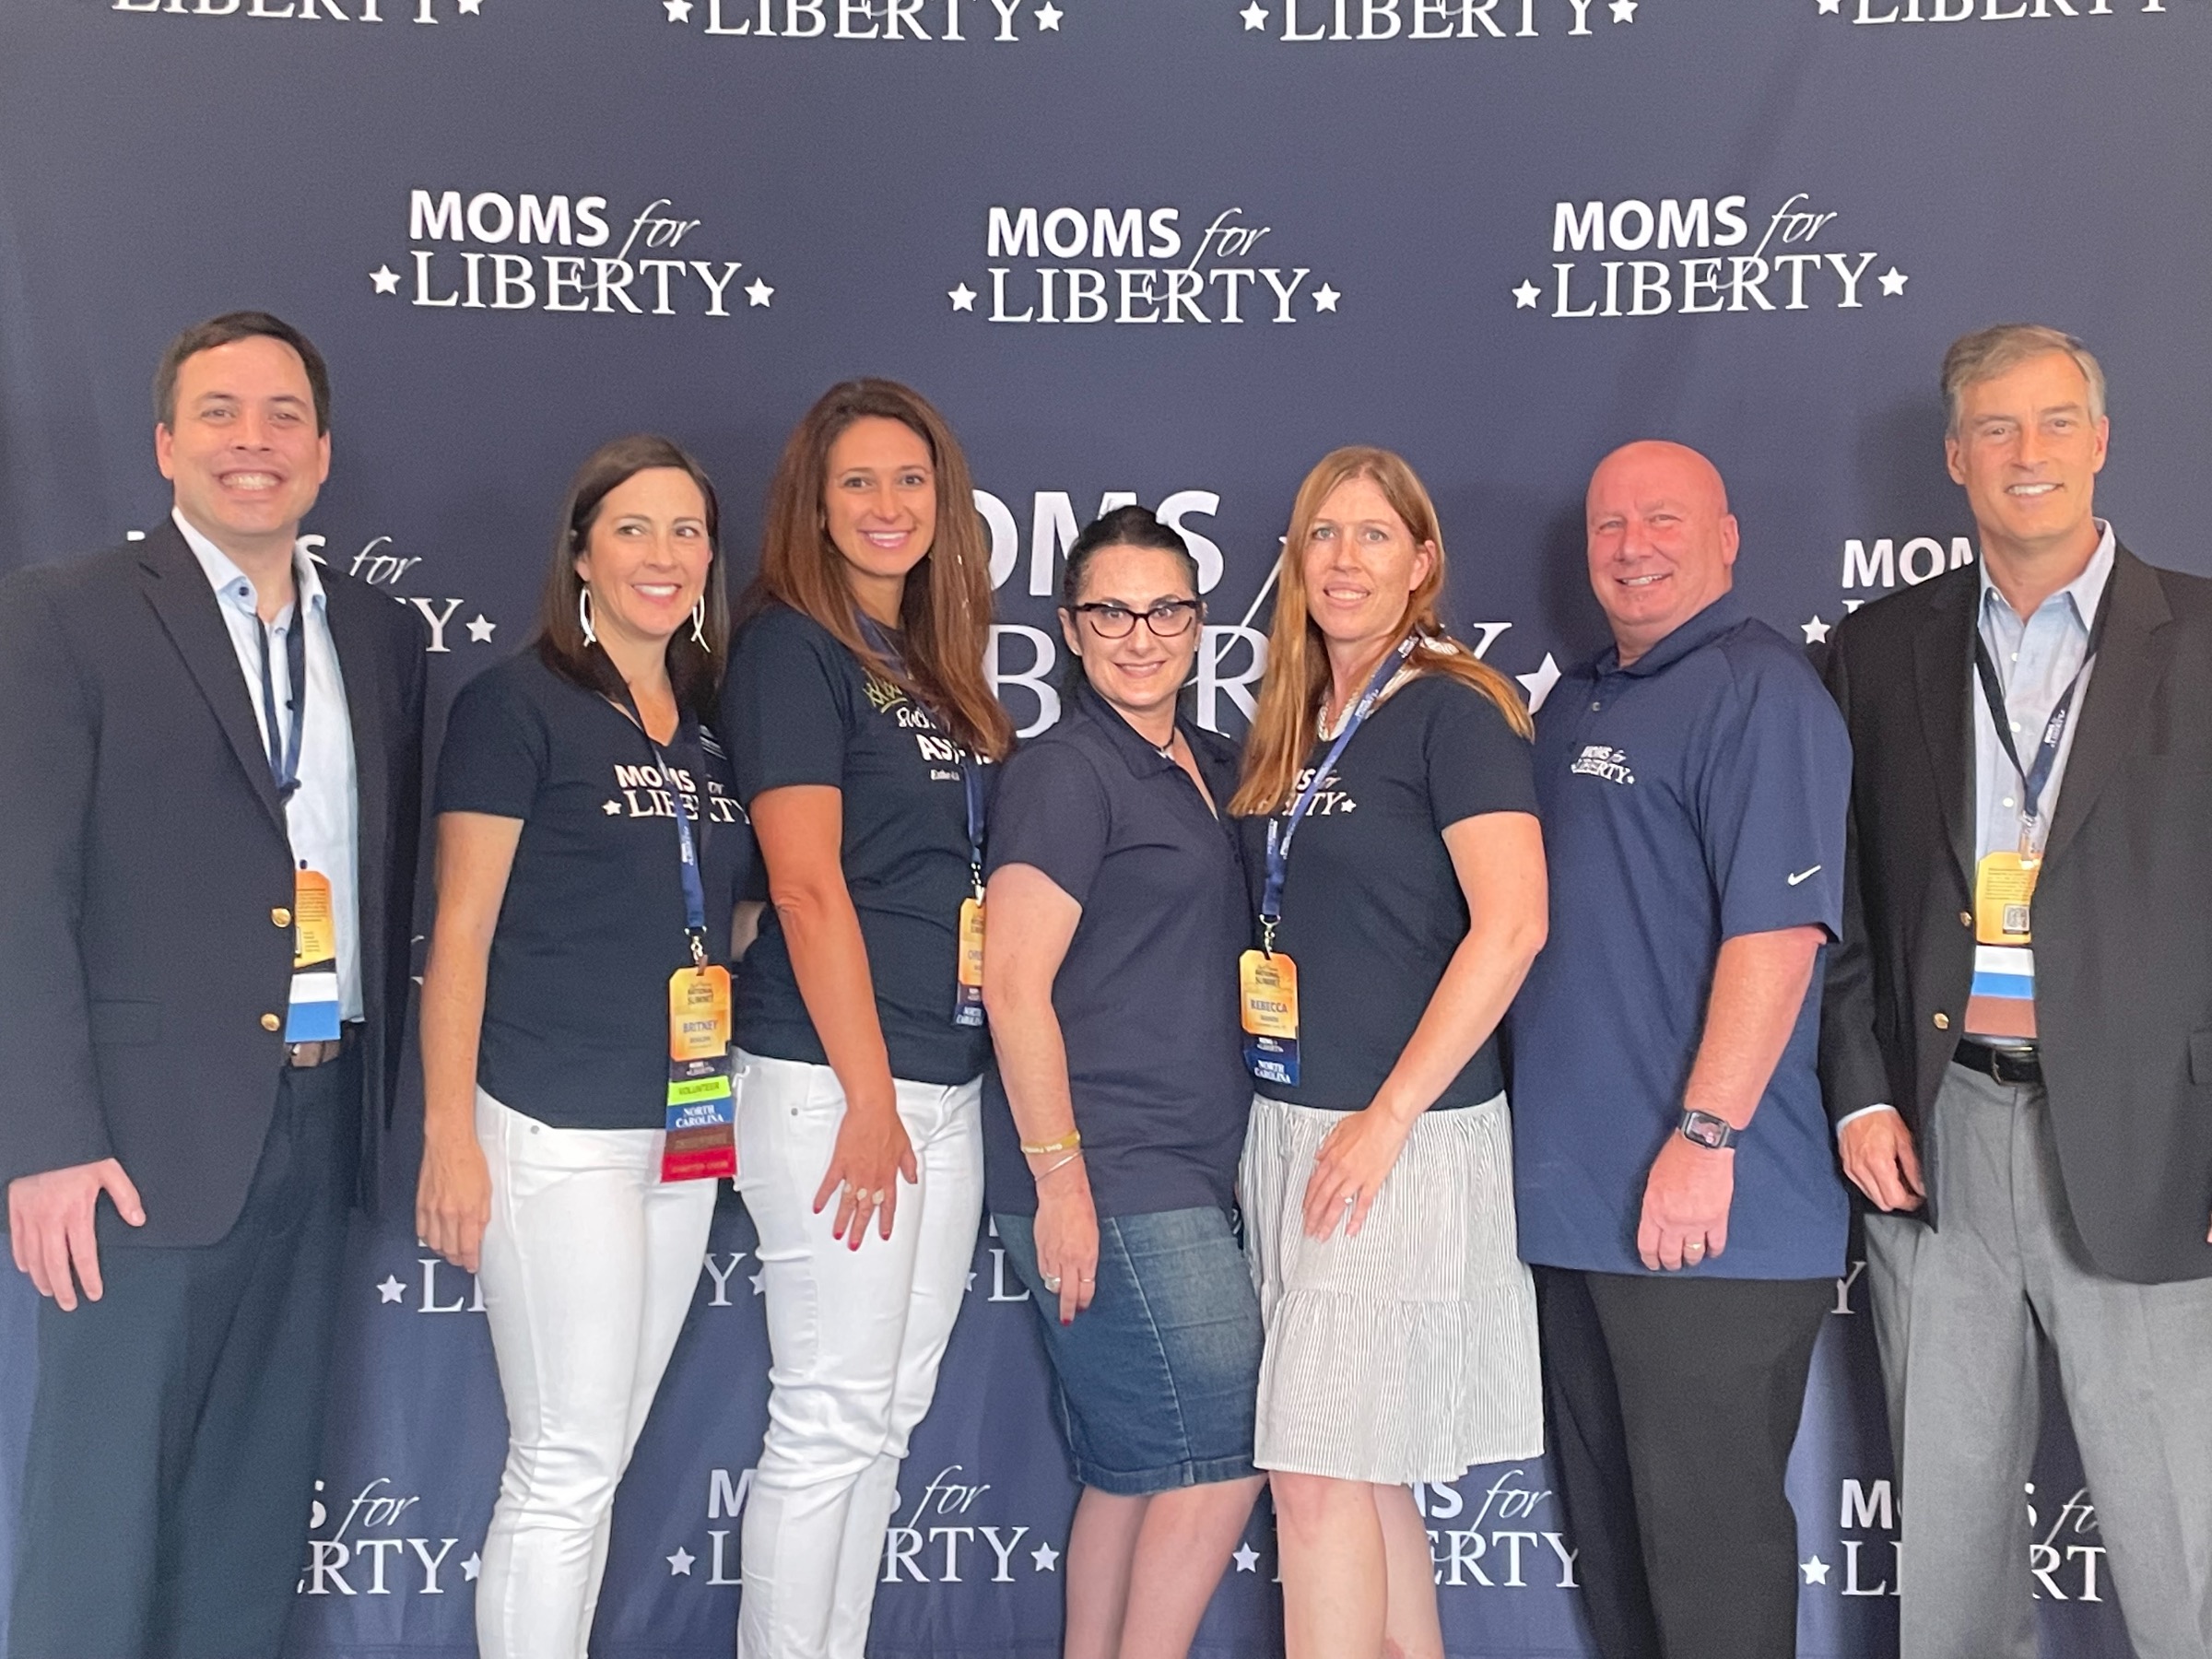 Our executive board with Doug Turpin & Kevin Abplanalp of the Coalition for Liberty 